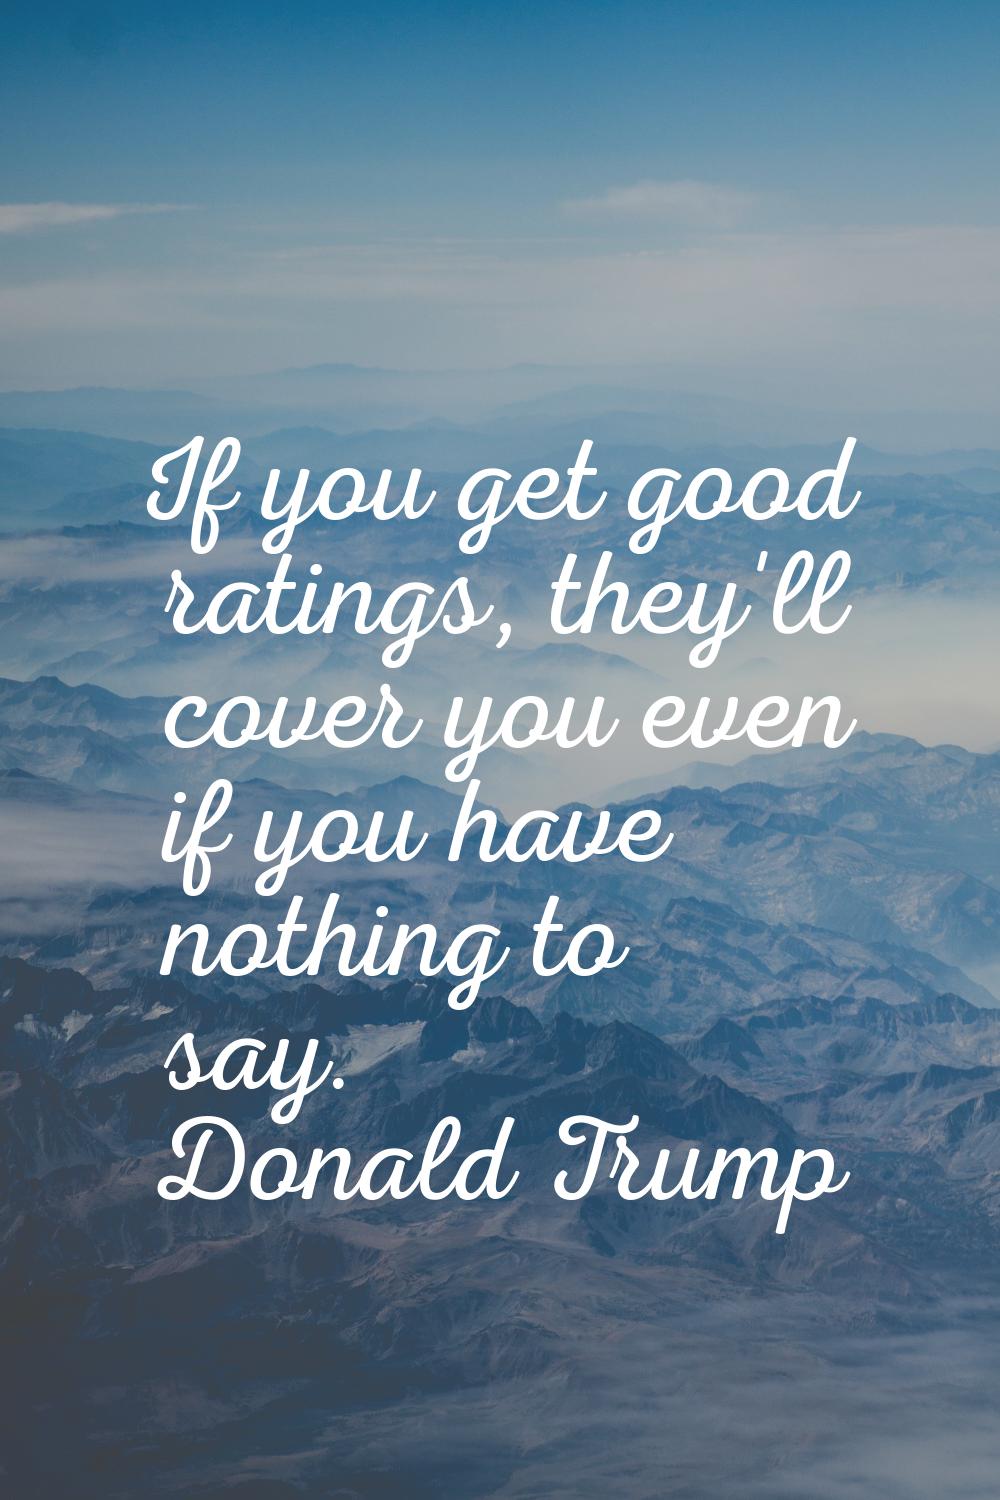 If you get good ratings, they'll cover you even if you have nothing to say.